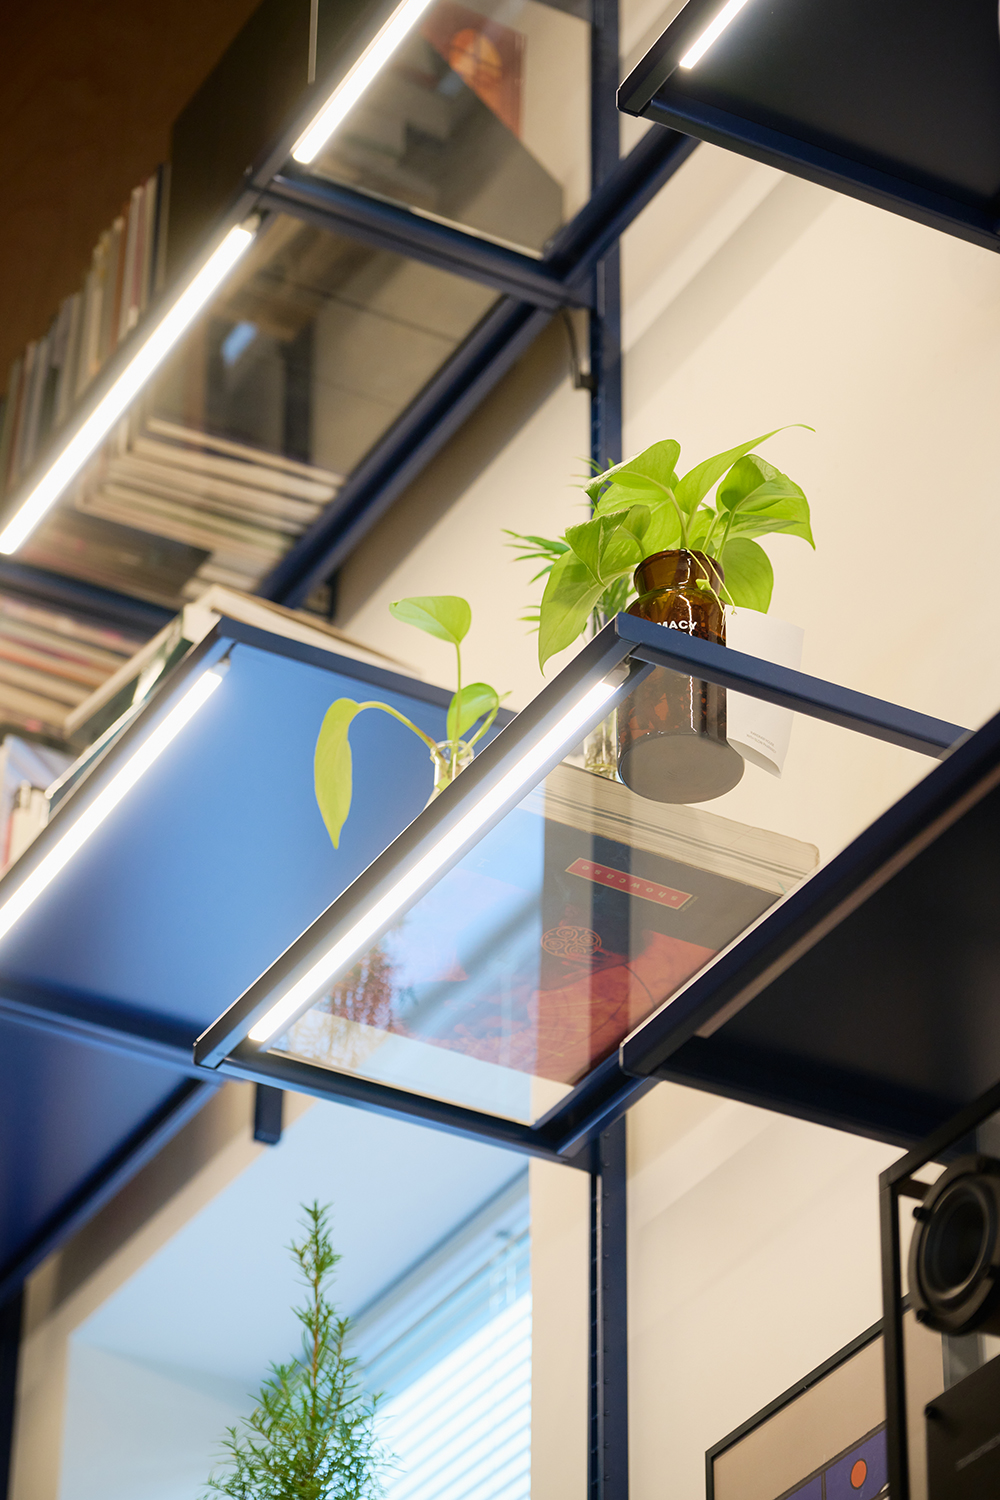 SYSTEM000 SHELF WITH GLASS (11 COLORS)